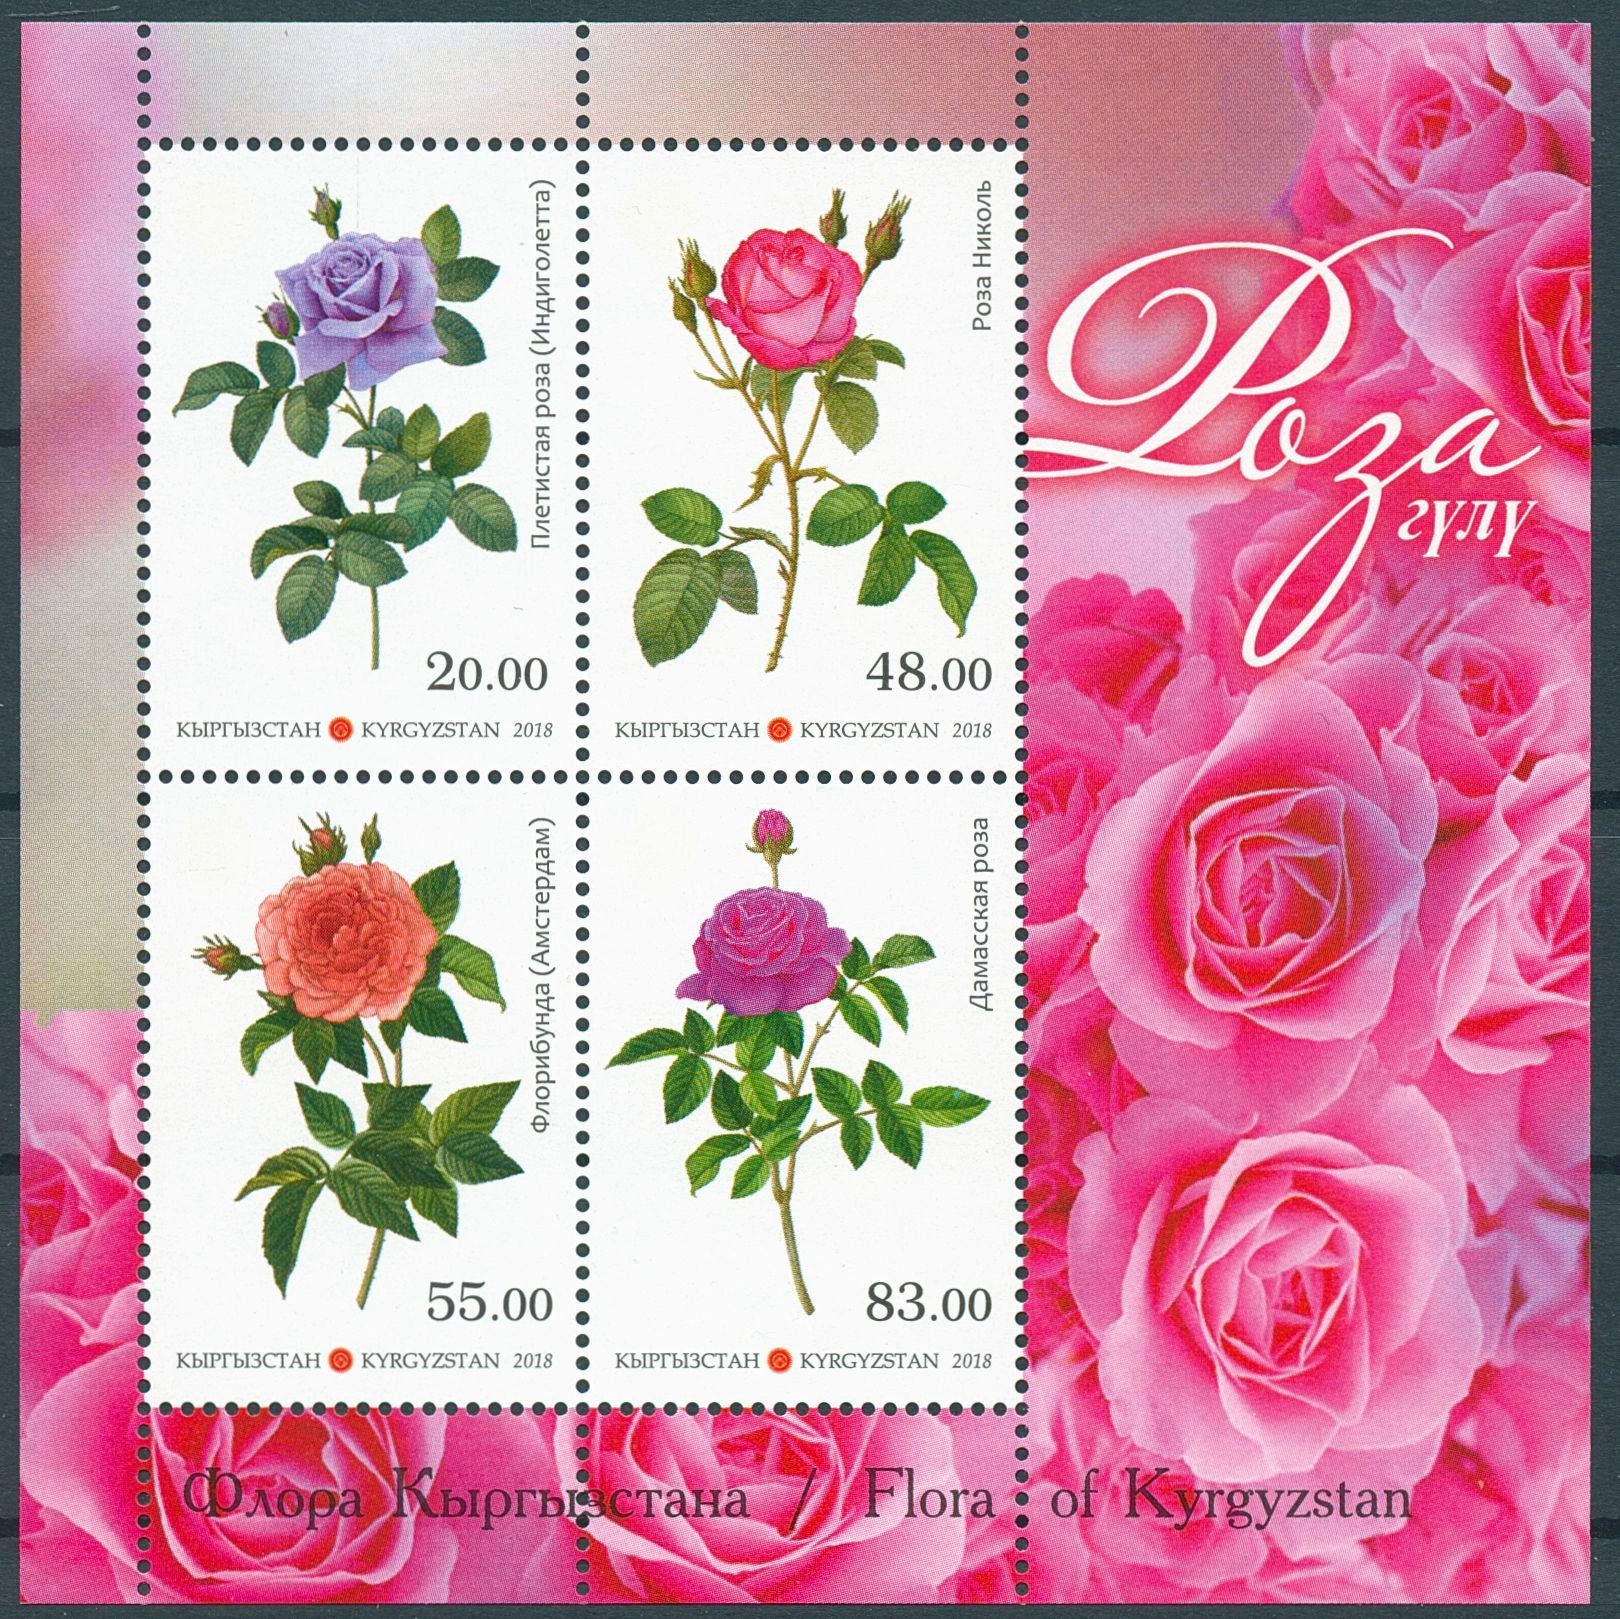 Kyrgyzstan KP 2018 MNH Roses 4v M/S Flowers Flora Stamps